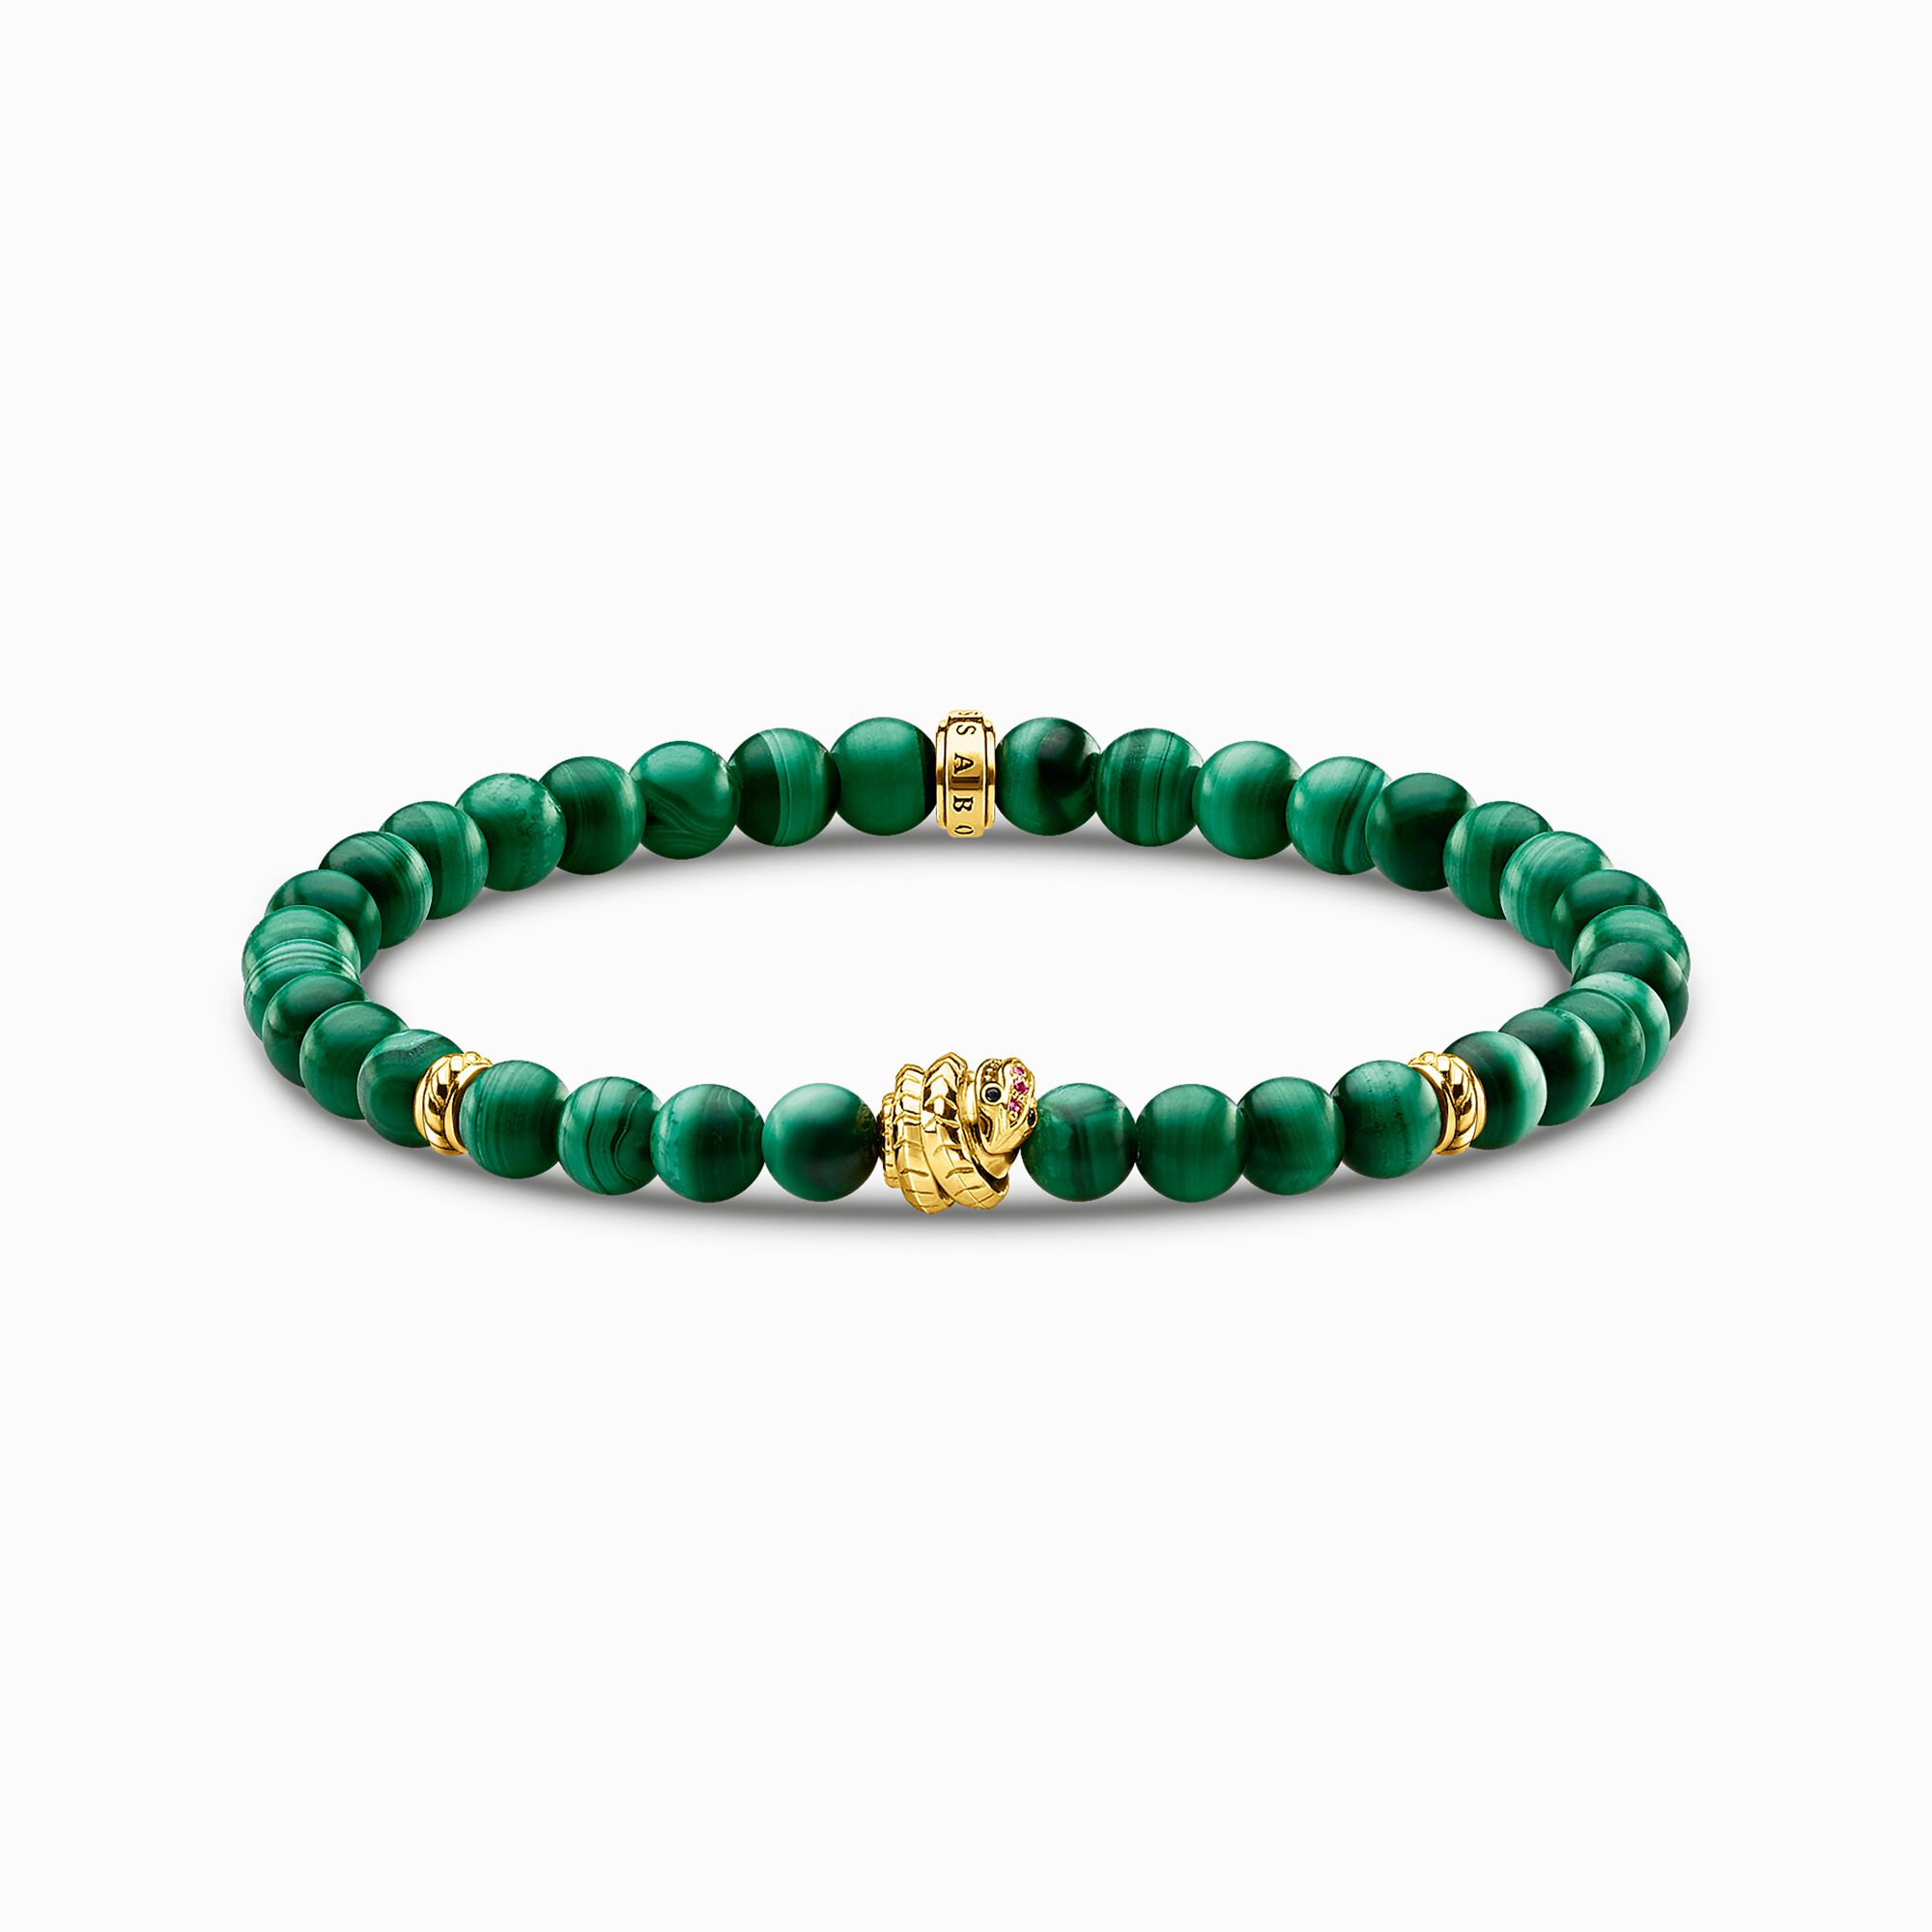 Bracelet green stones with snake from the Glam &amp; Soul collection in the THOMAS SABO online store